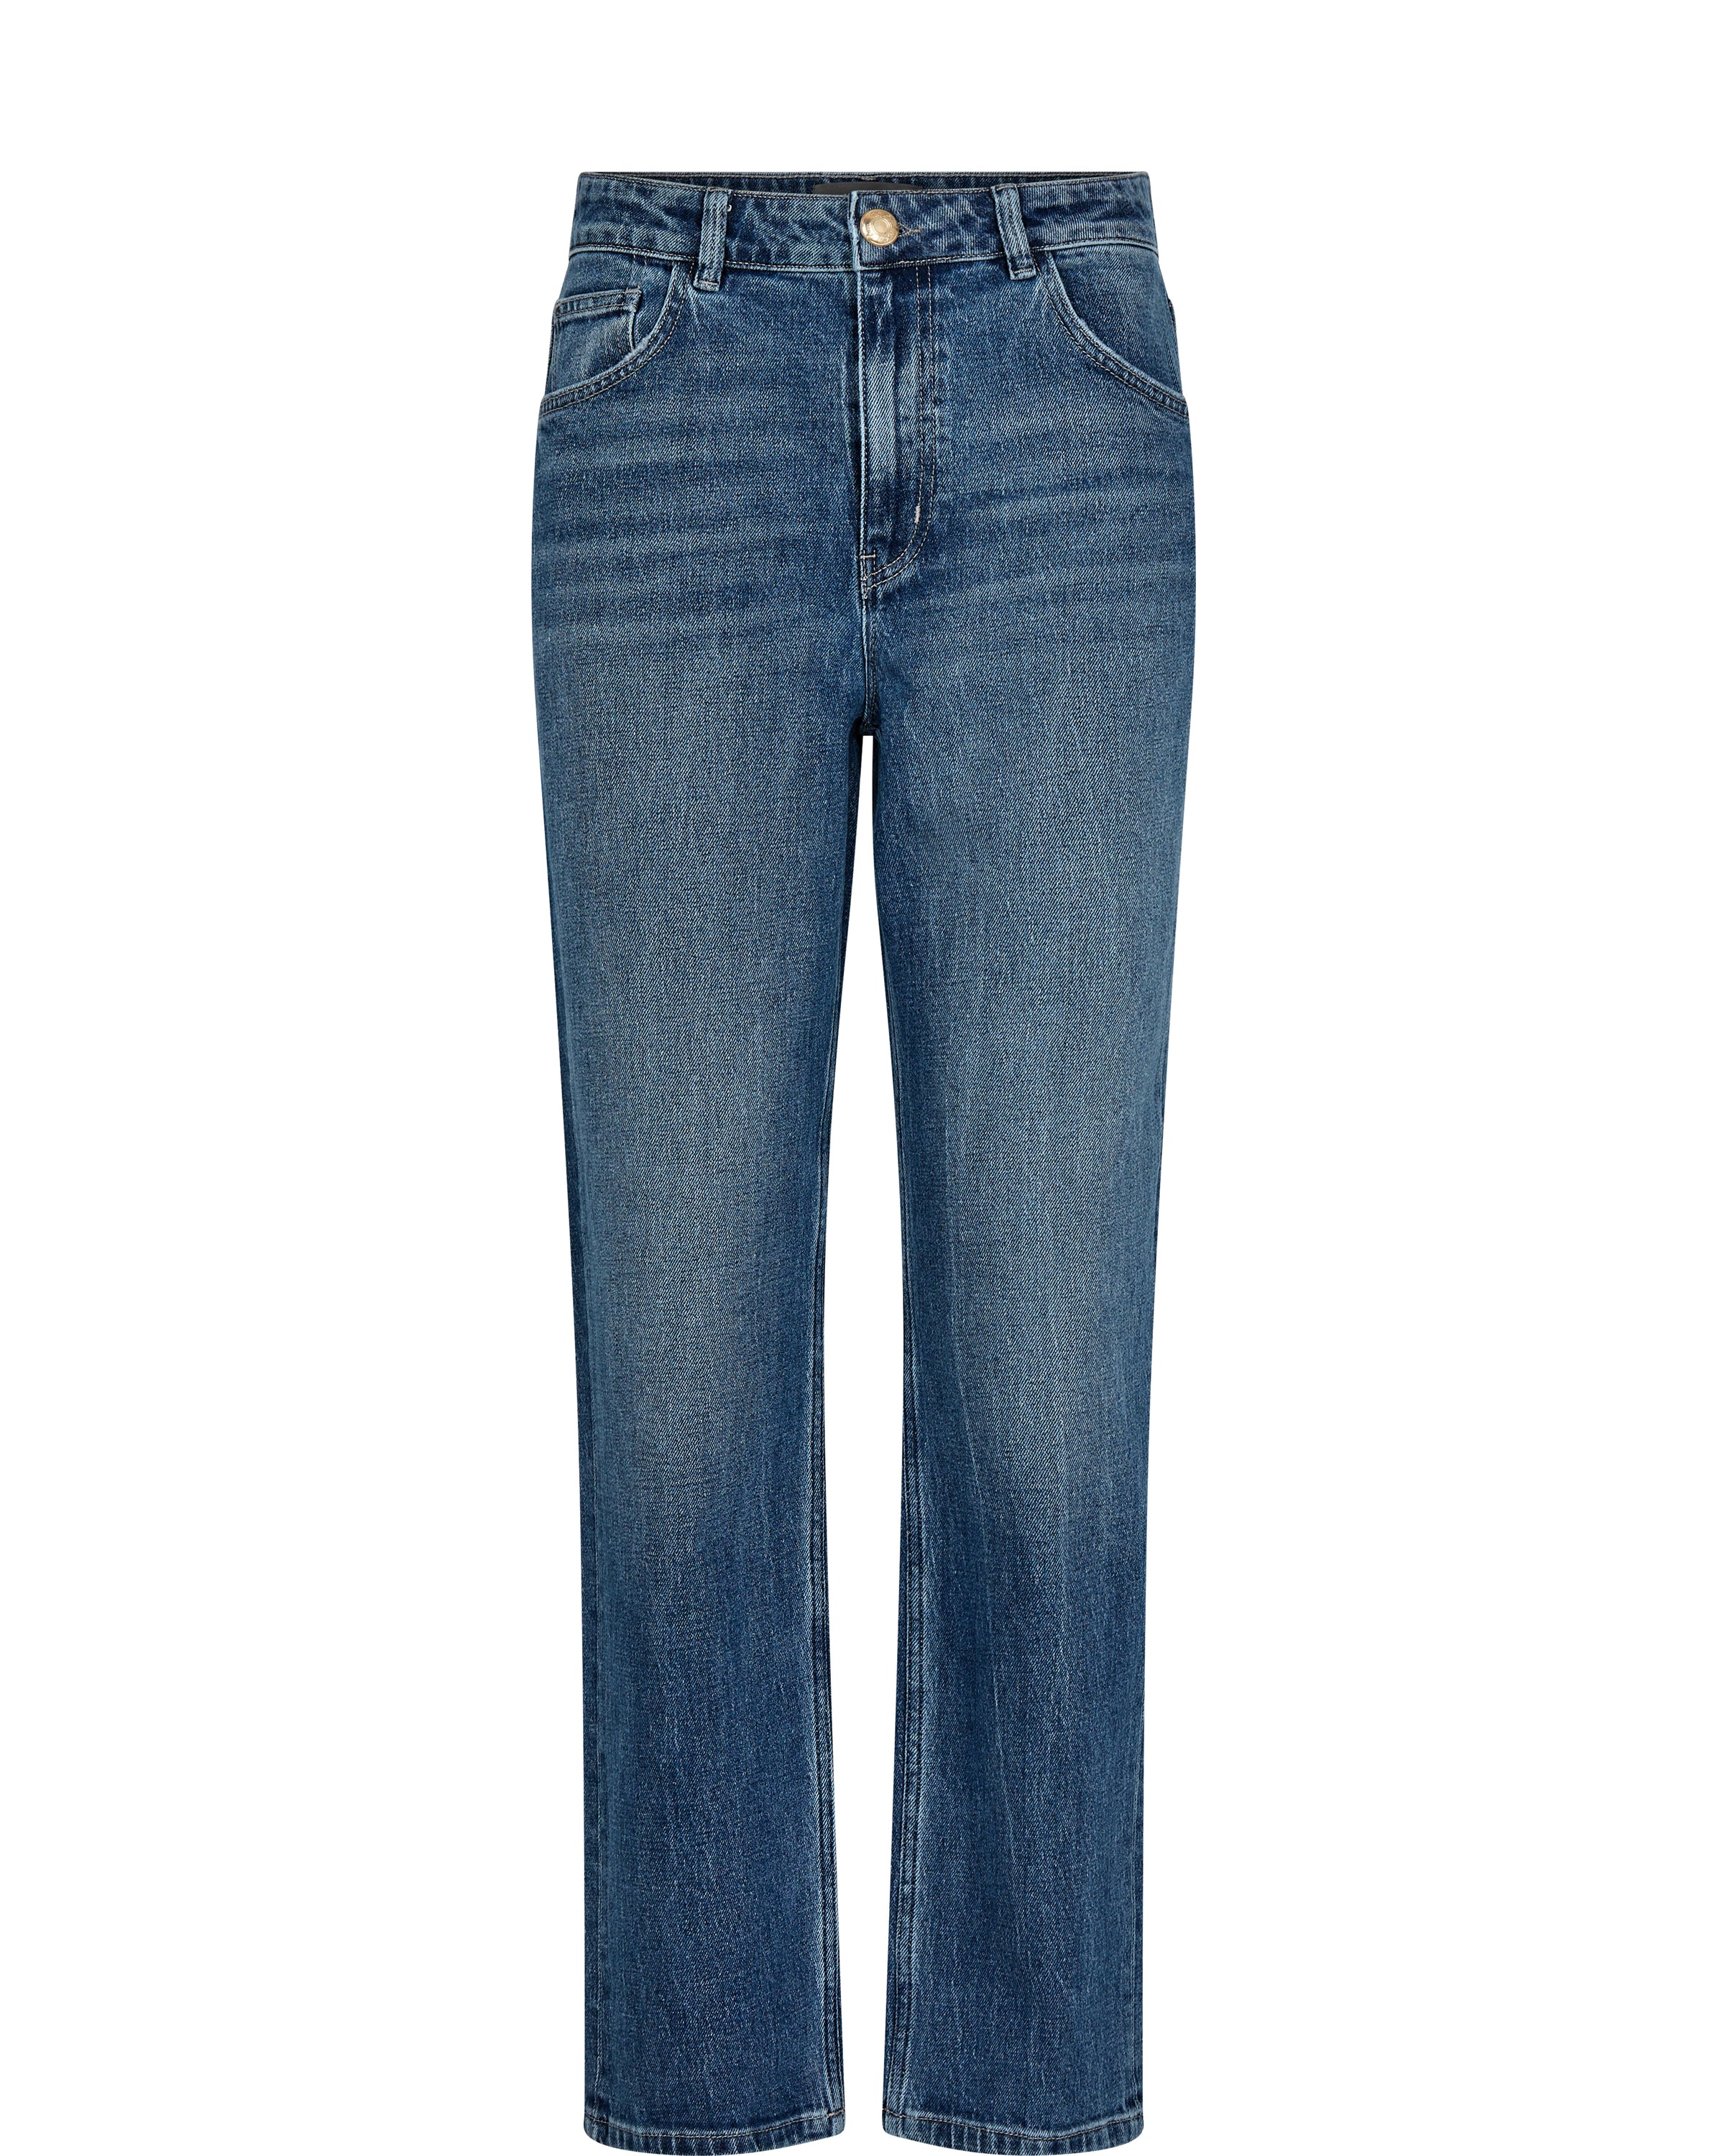 Blue vintage wash straight leg jeans with zip and button fly